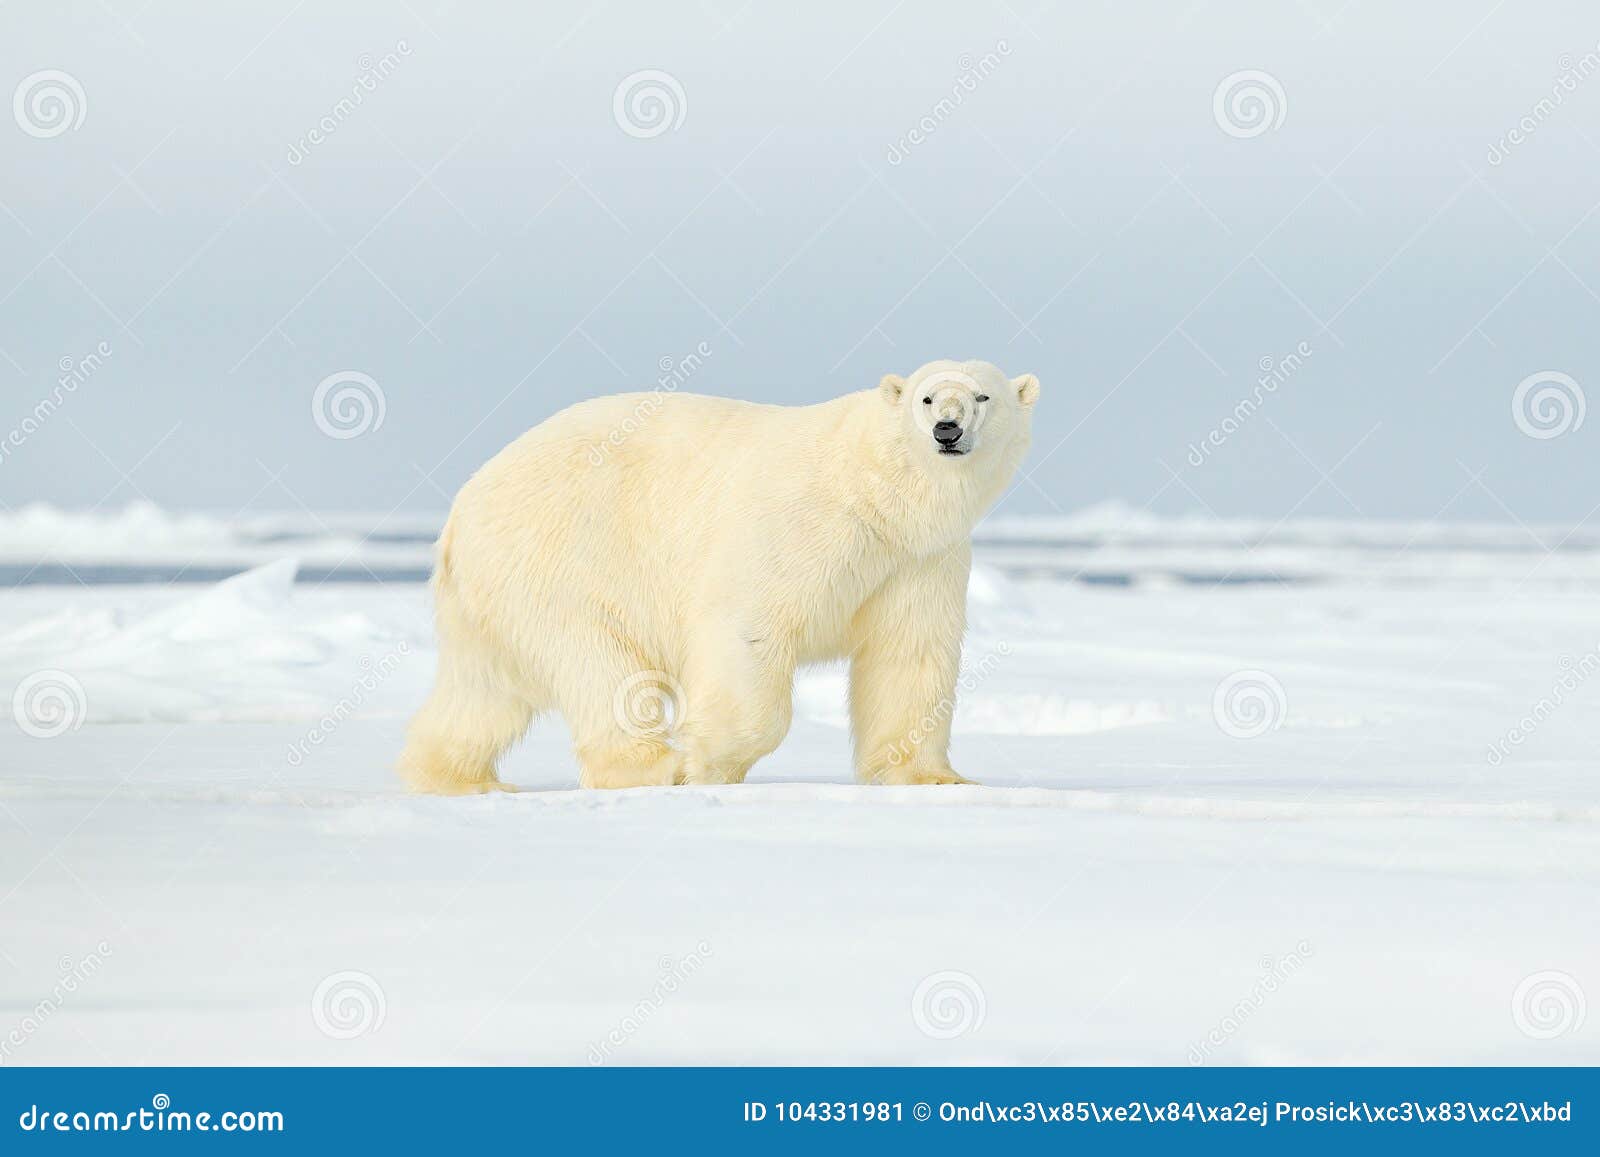 polar bear on drift ice edge with snow a water in arctic svalbard. white animal in the nature habitat, norway. wildlife scene from